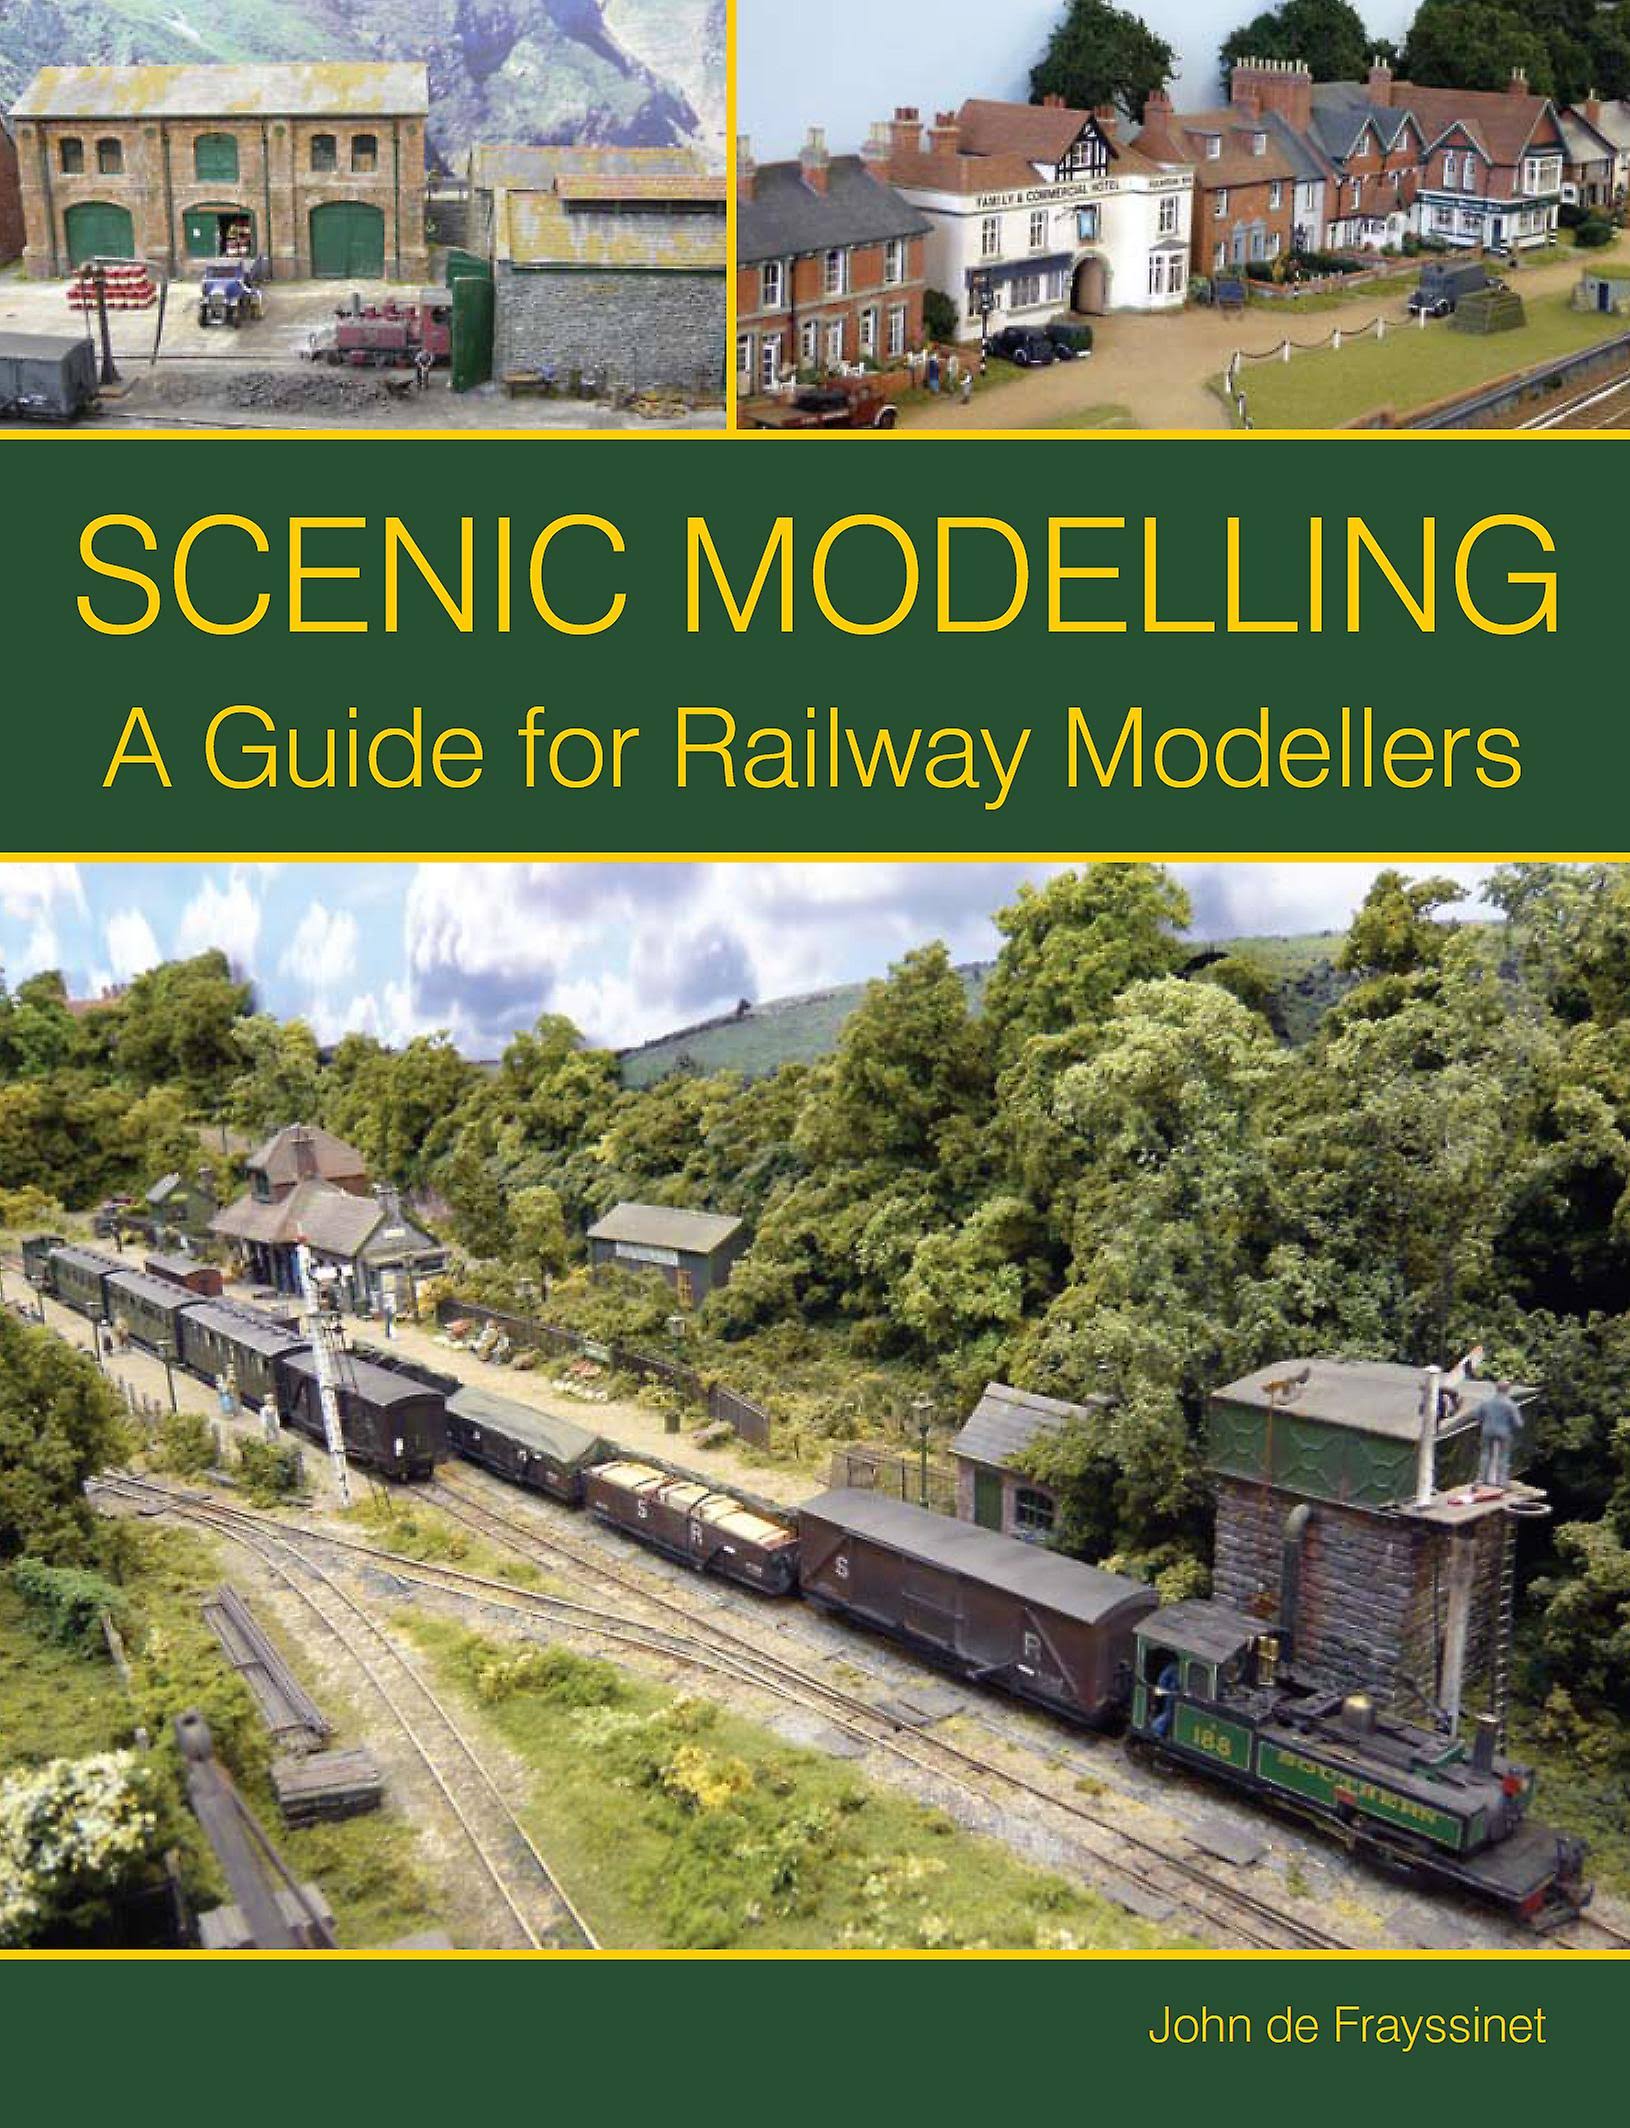 Scenic Modelling: A Guide for Railway Modellers [Book]